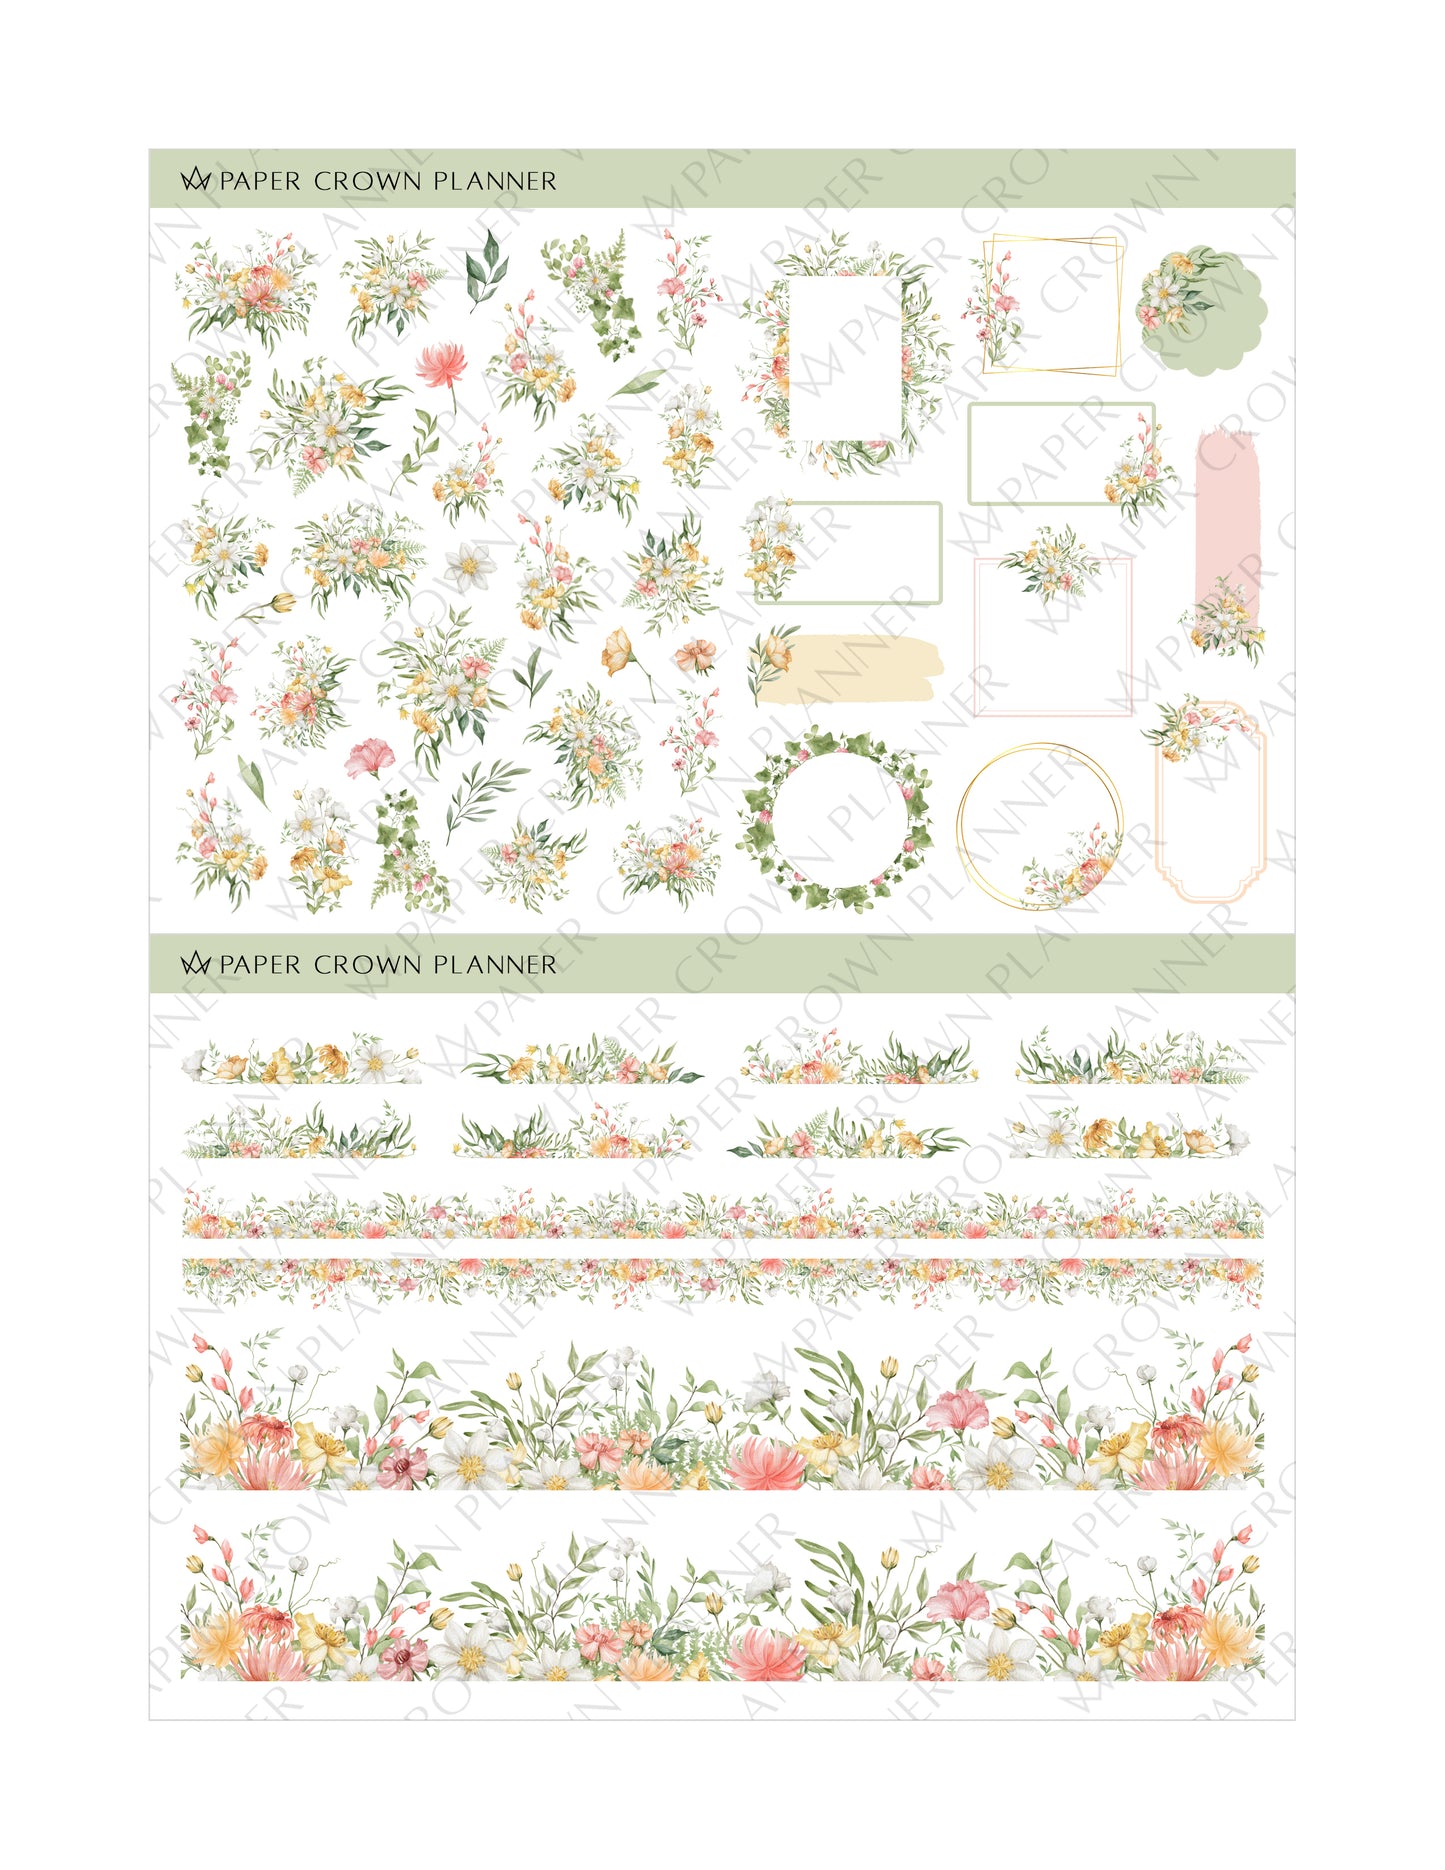 SUMMER COUNTRYSIDE ADD-ON // Floral Deco